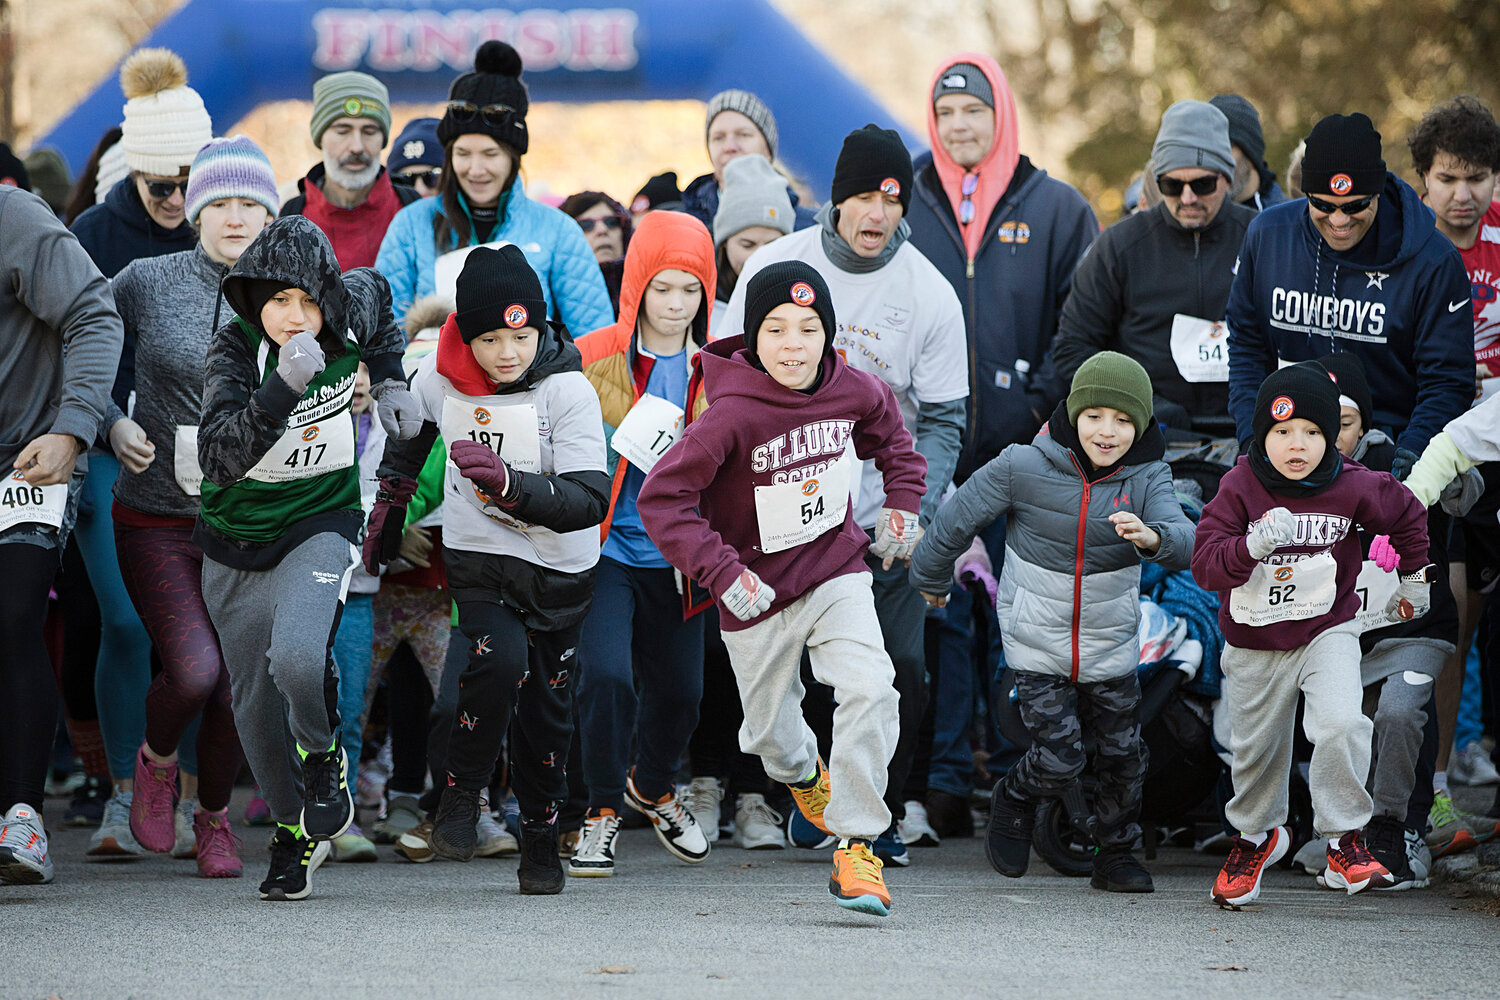 Lachlan Donaghy (middle) leads the way as he and other participants take off at the start of the 1.5-mile race. More than 200 people participated in the 24th annual Trot Off Your Turkey 1.5-mile race.